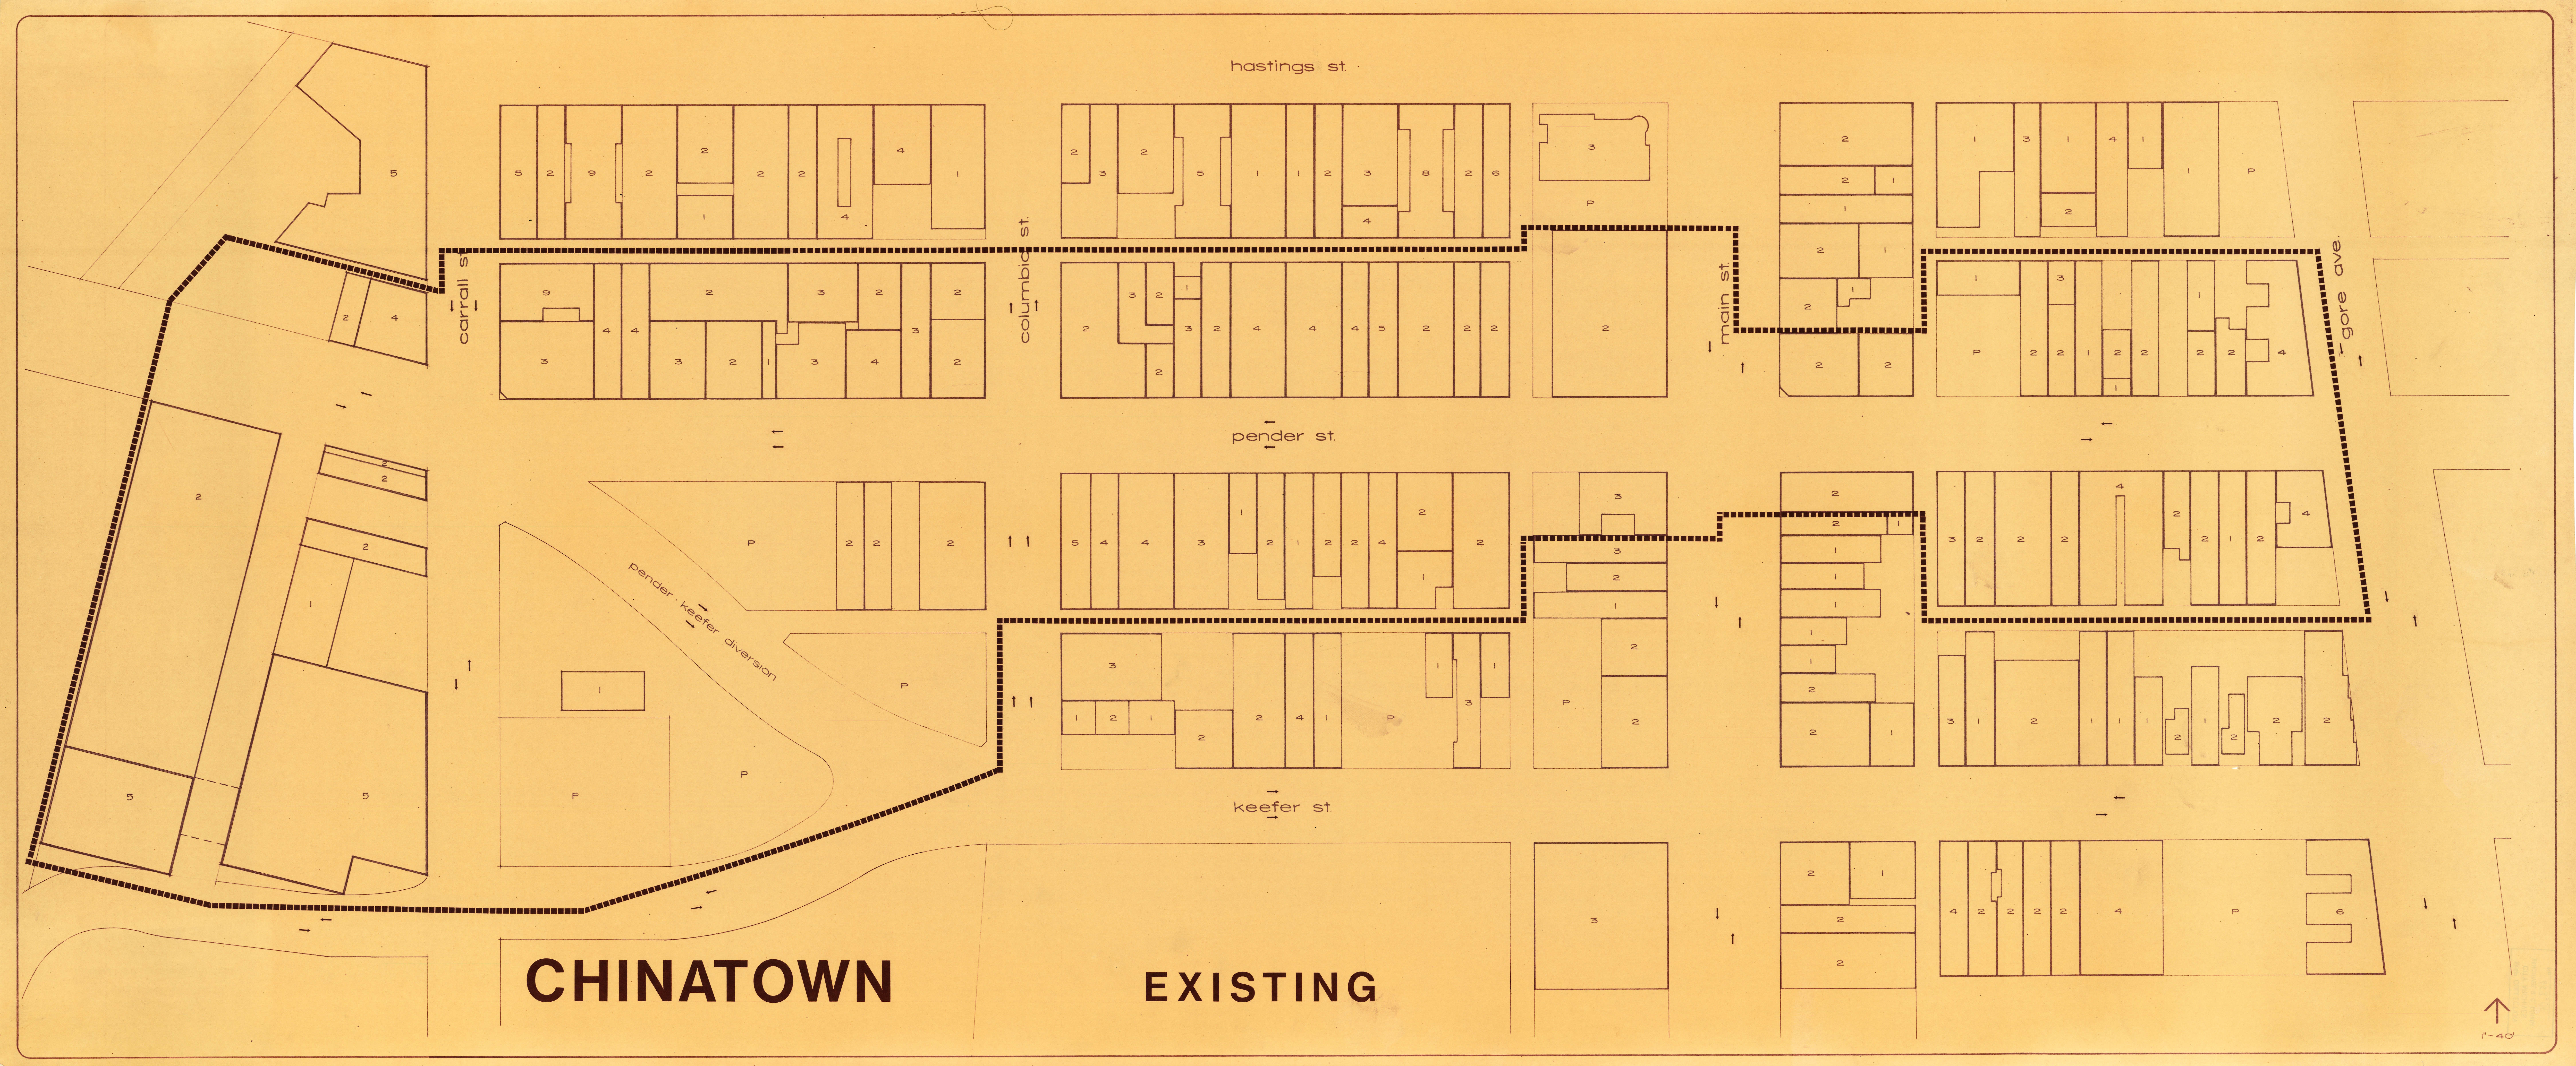 Map of Chinatown